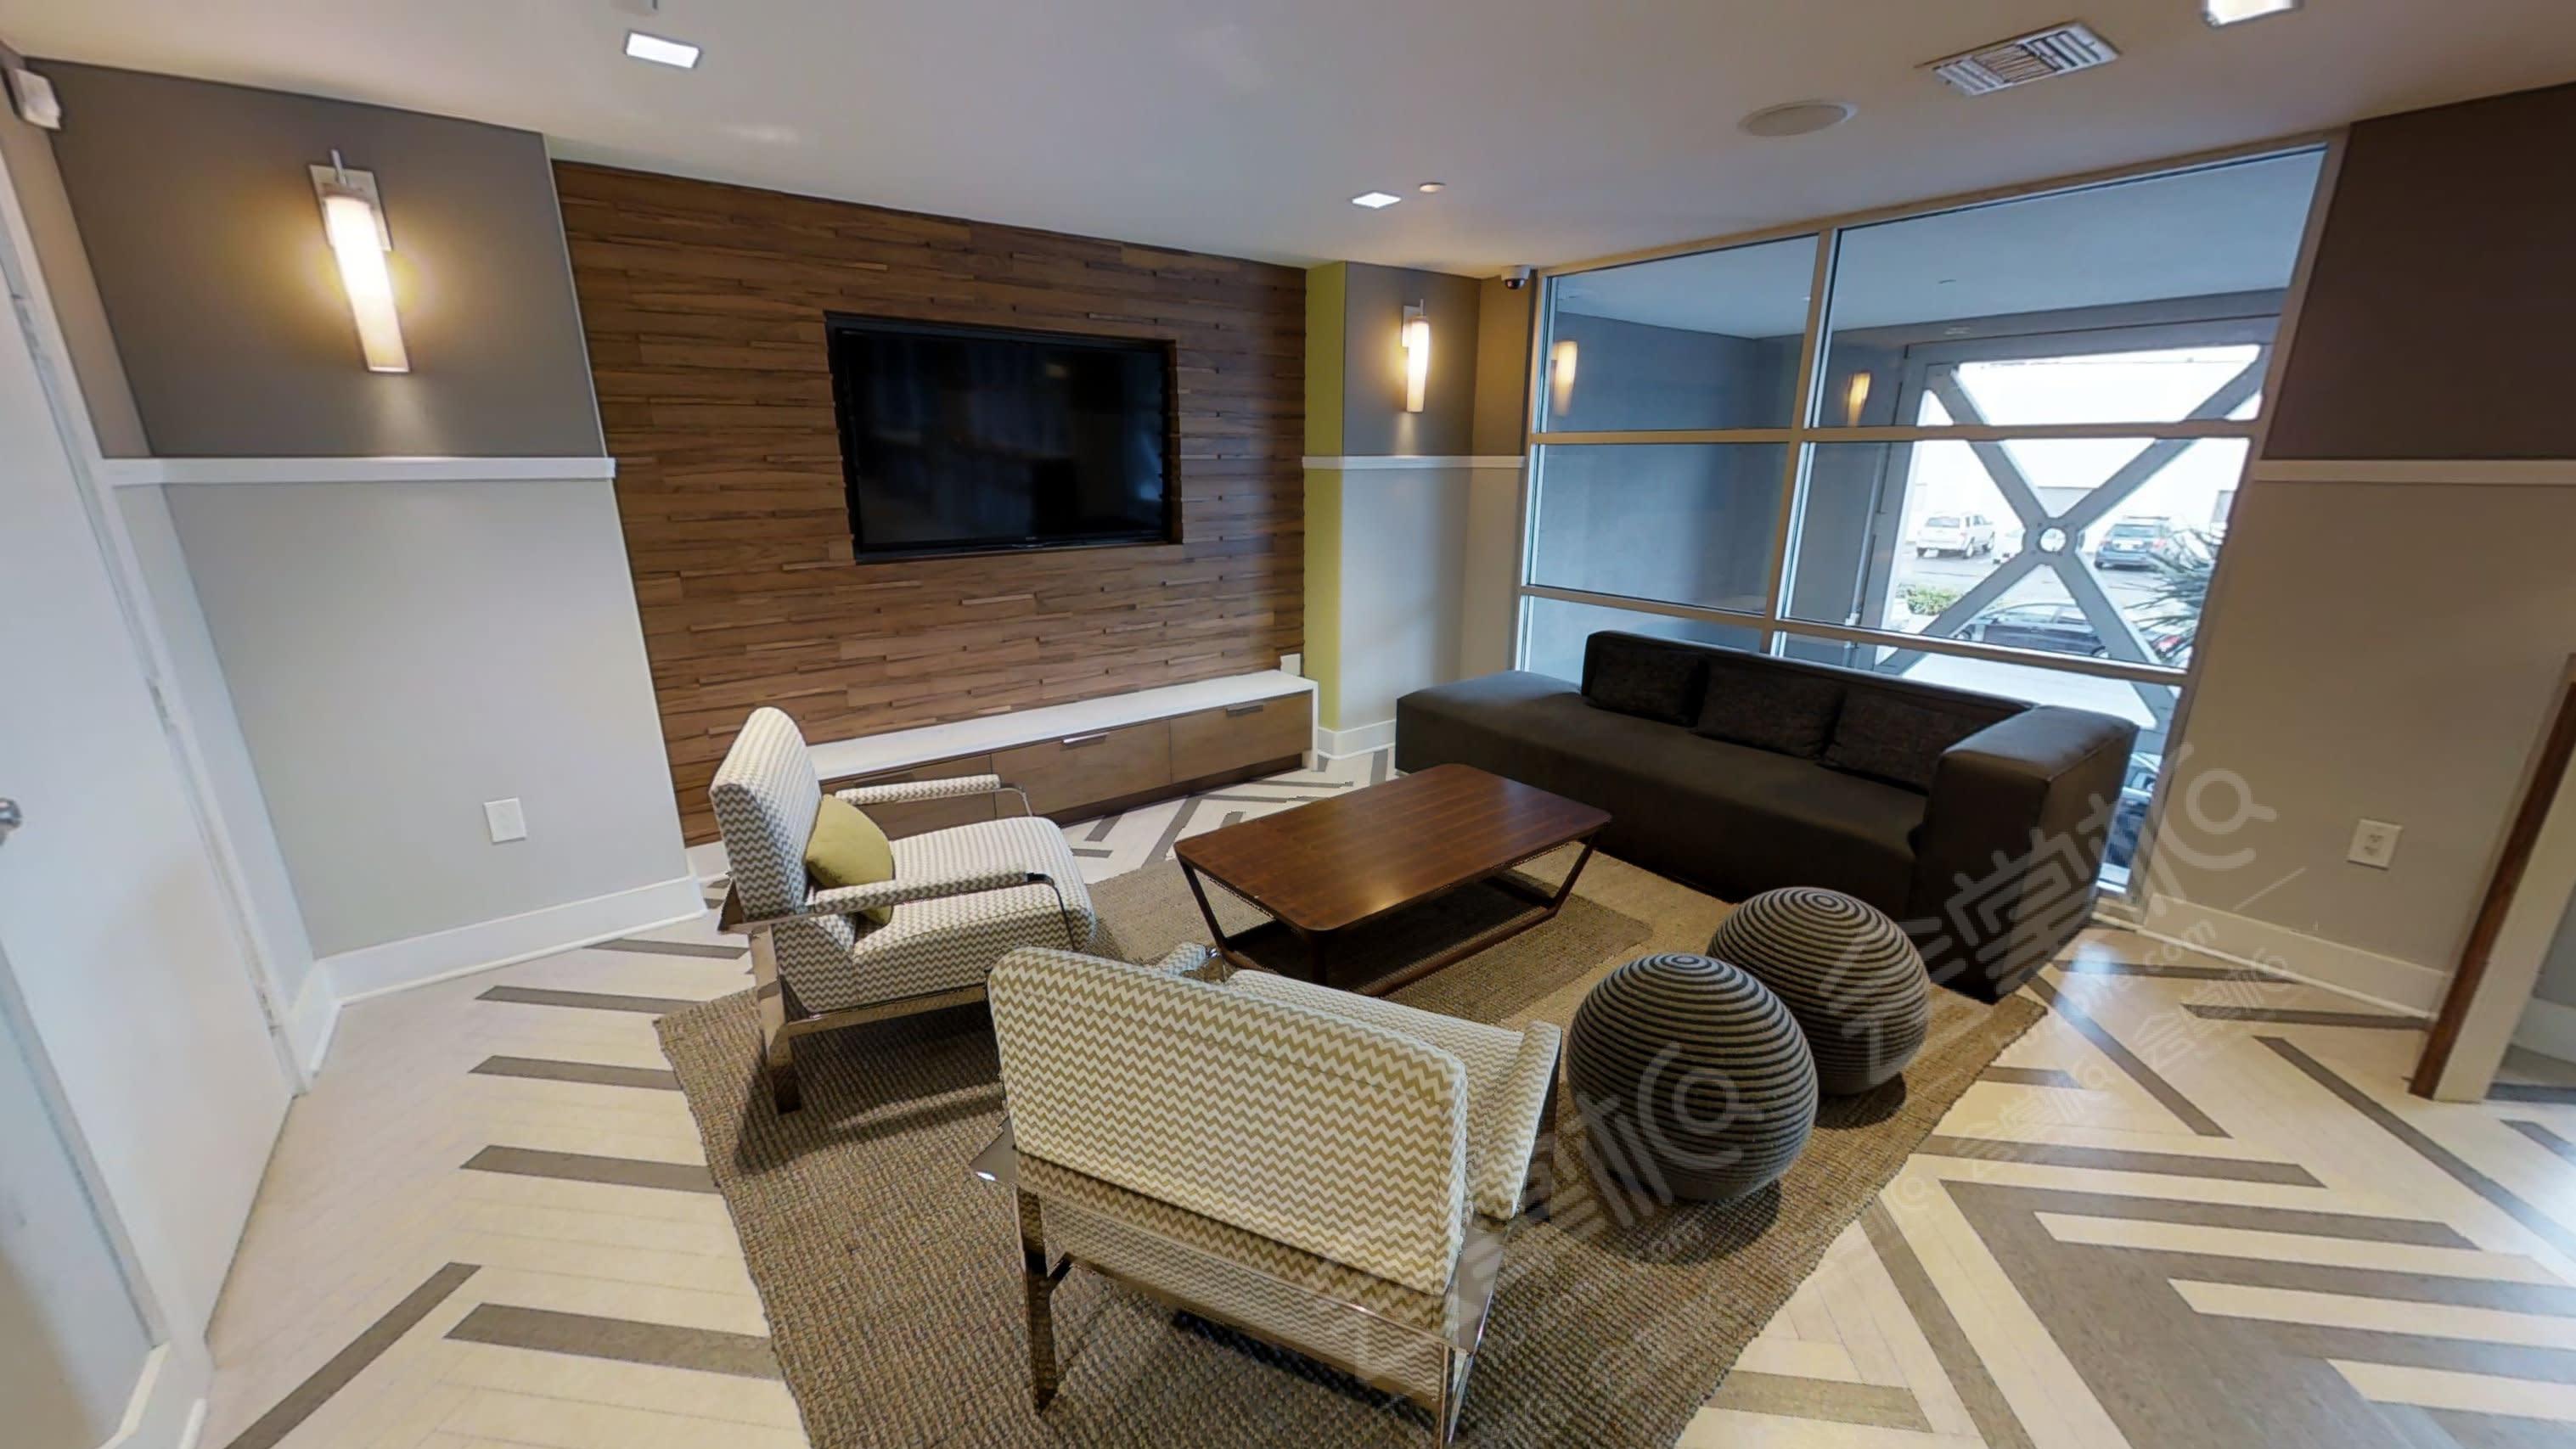 Sleek Lounge with Pool Table & Open Kitchenette, Great for Entertaining!